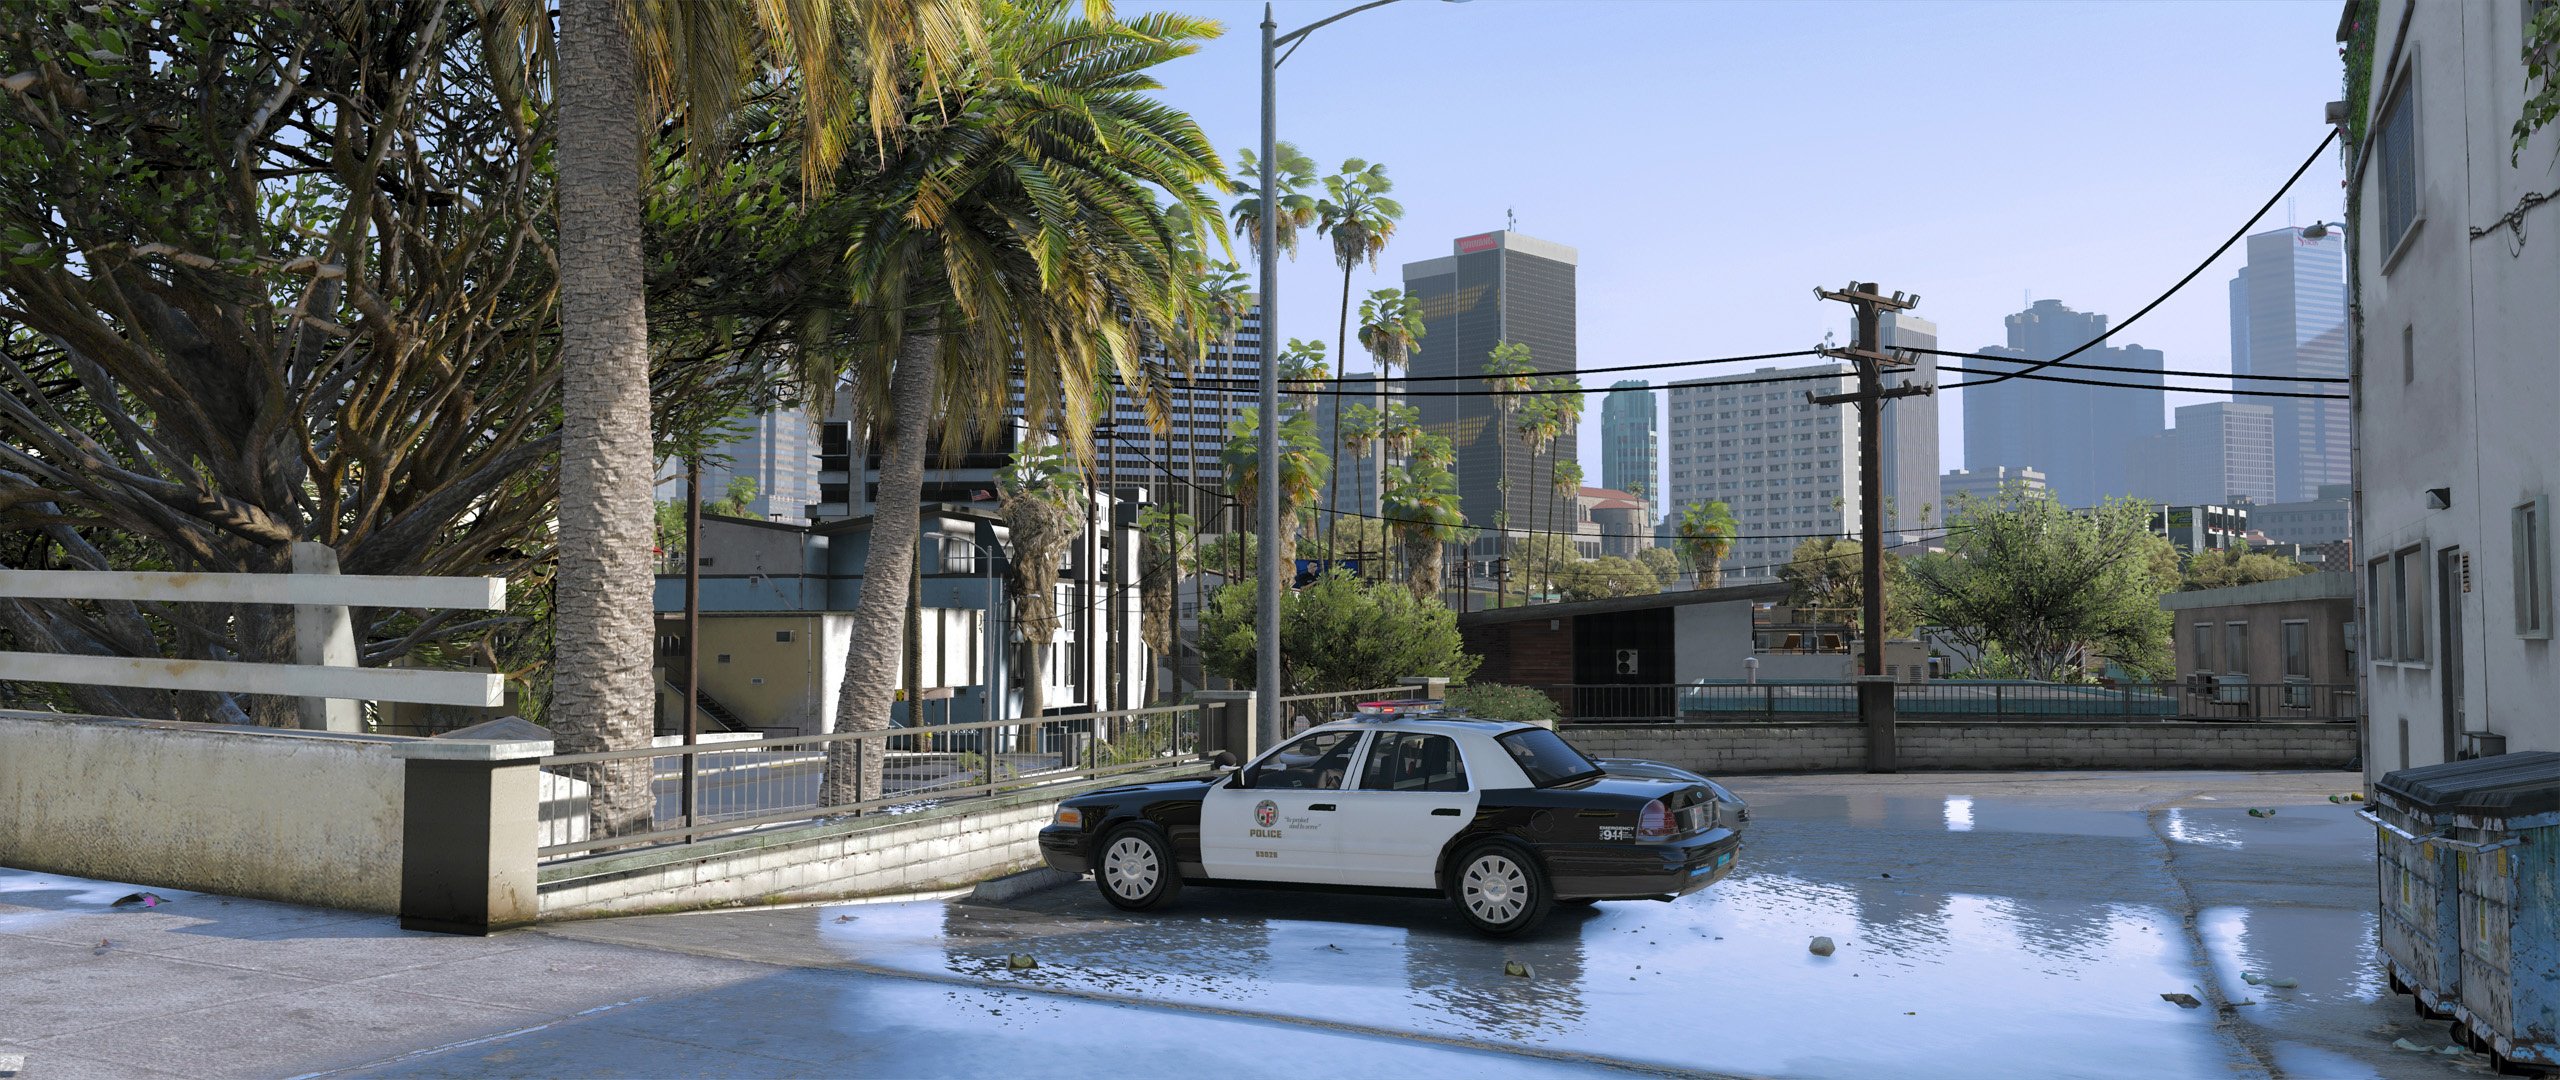 New GTA V Mod Pushes Photorealistic Graphics To the Next Level #7